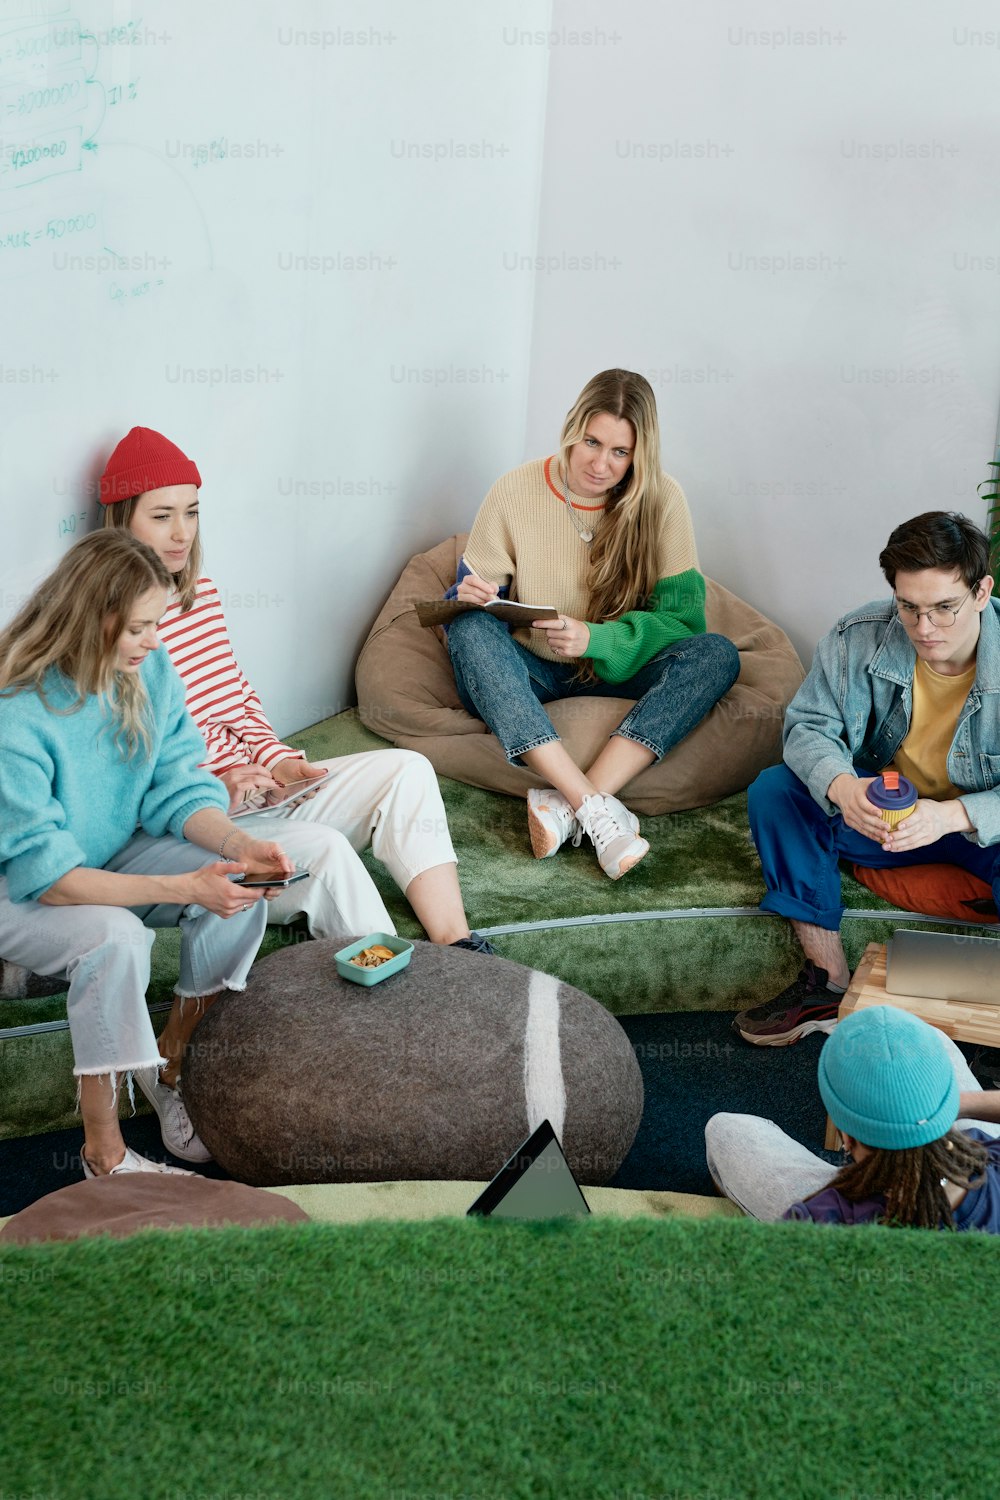 a group of people sitting on bean bags in a room